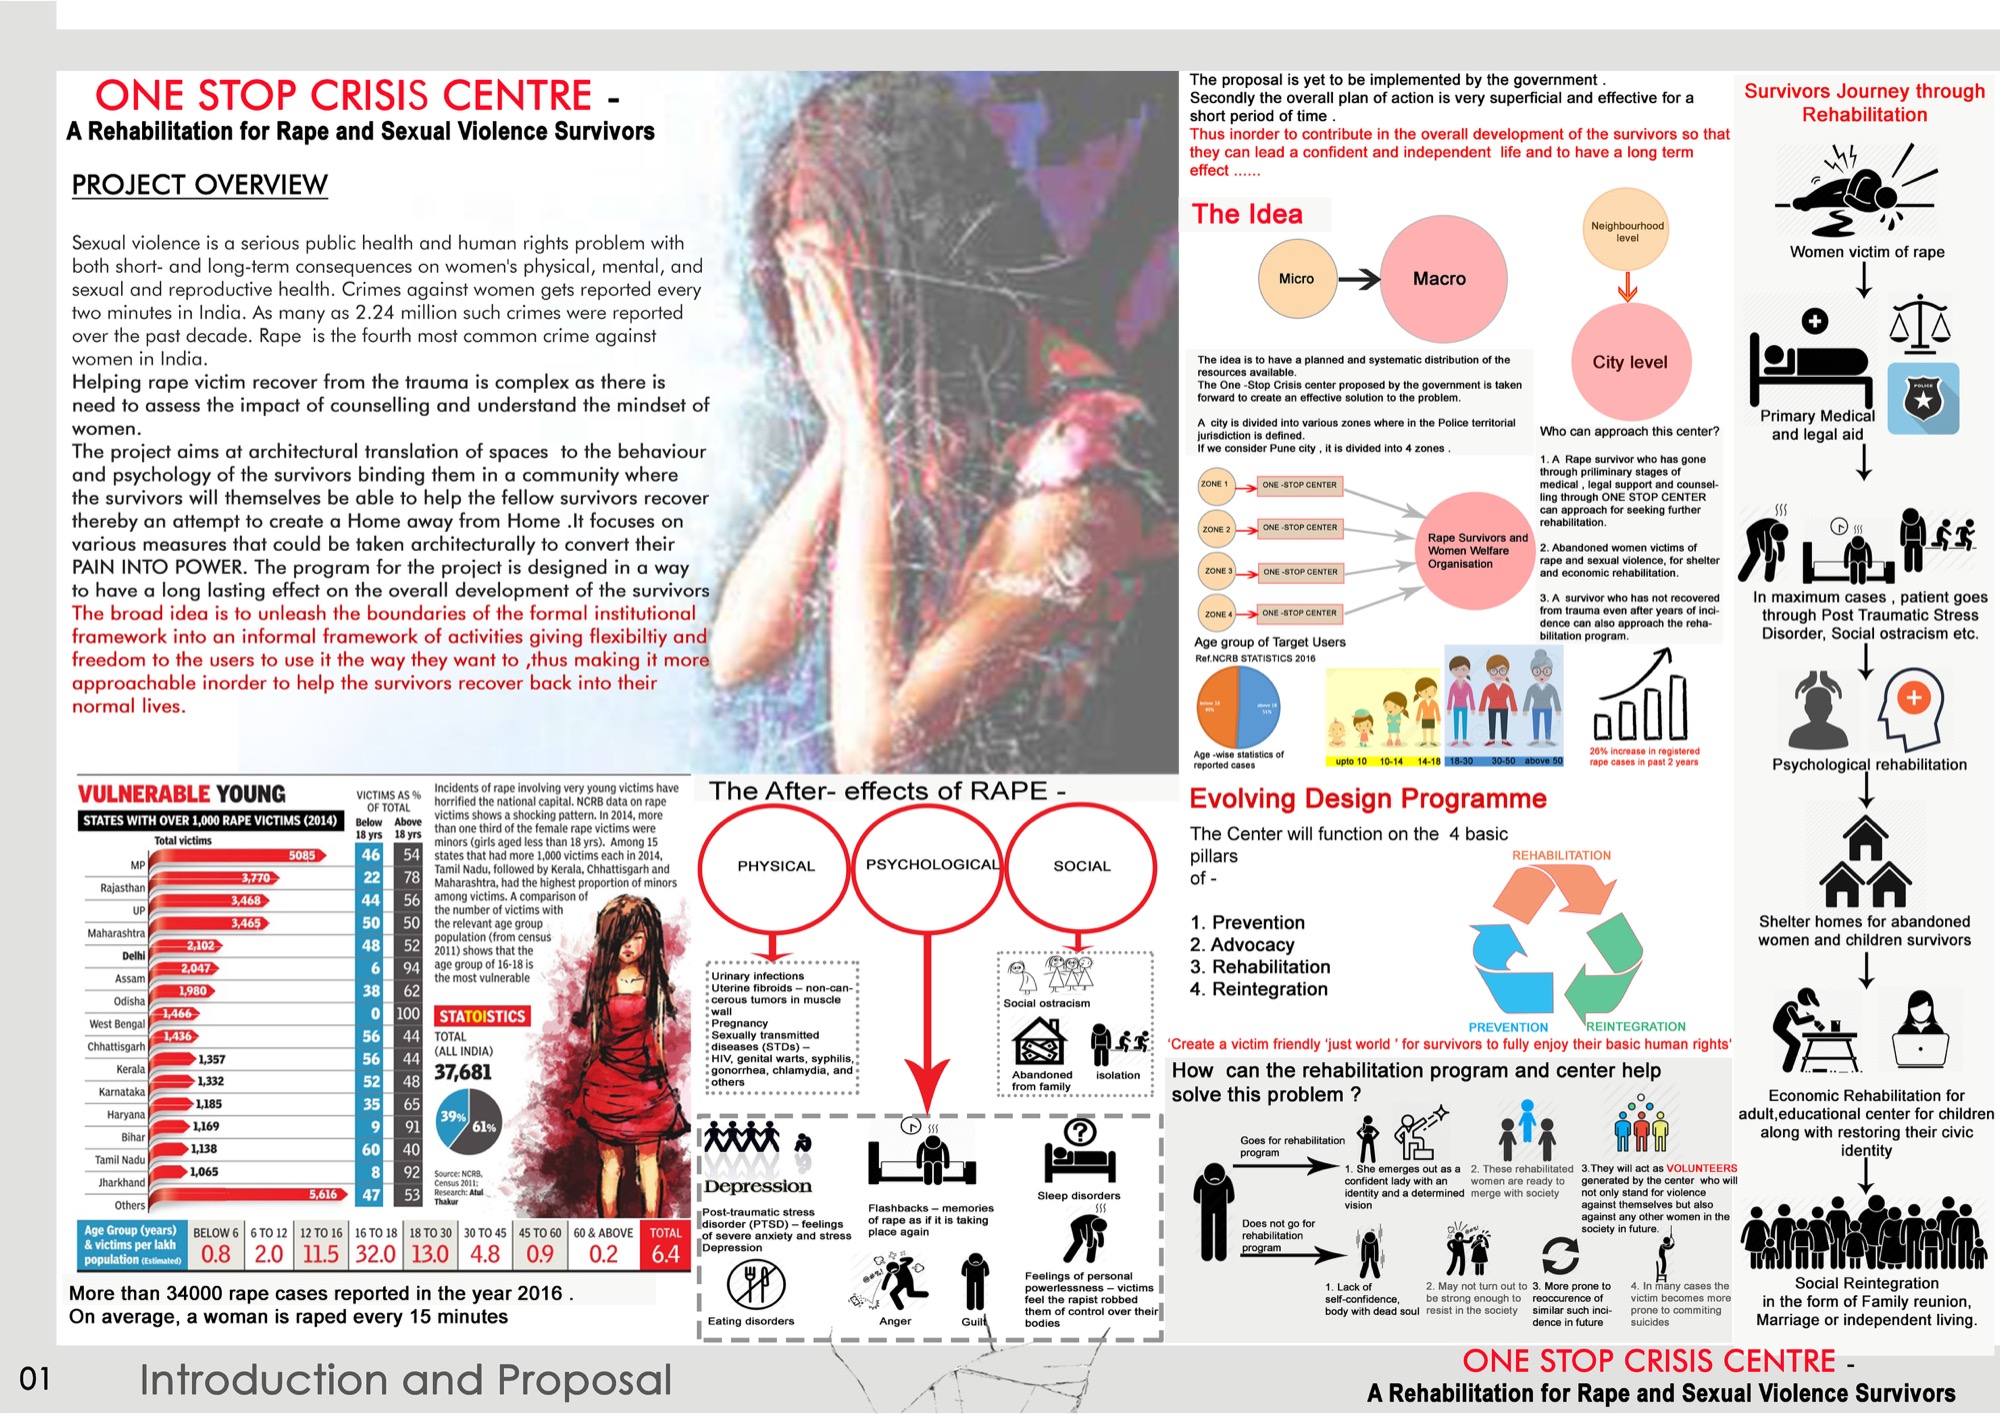 B.Arch Thesis: One Stop Crisis Centre at Pune, by Mehzabeen Sayyed, Allana College of Architecture 28